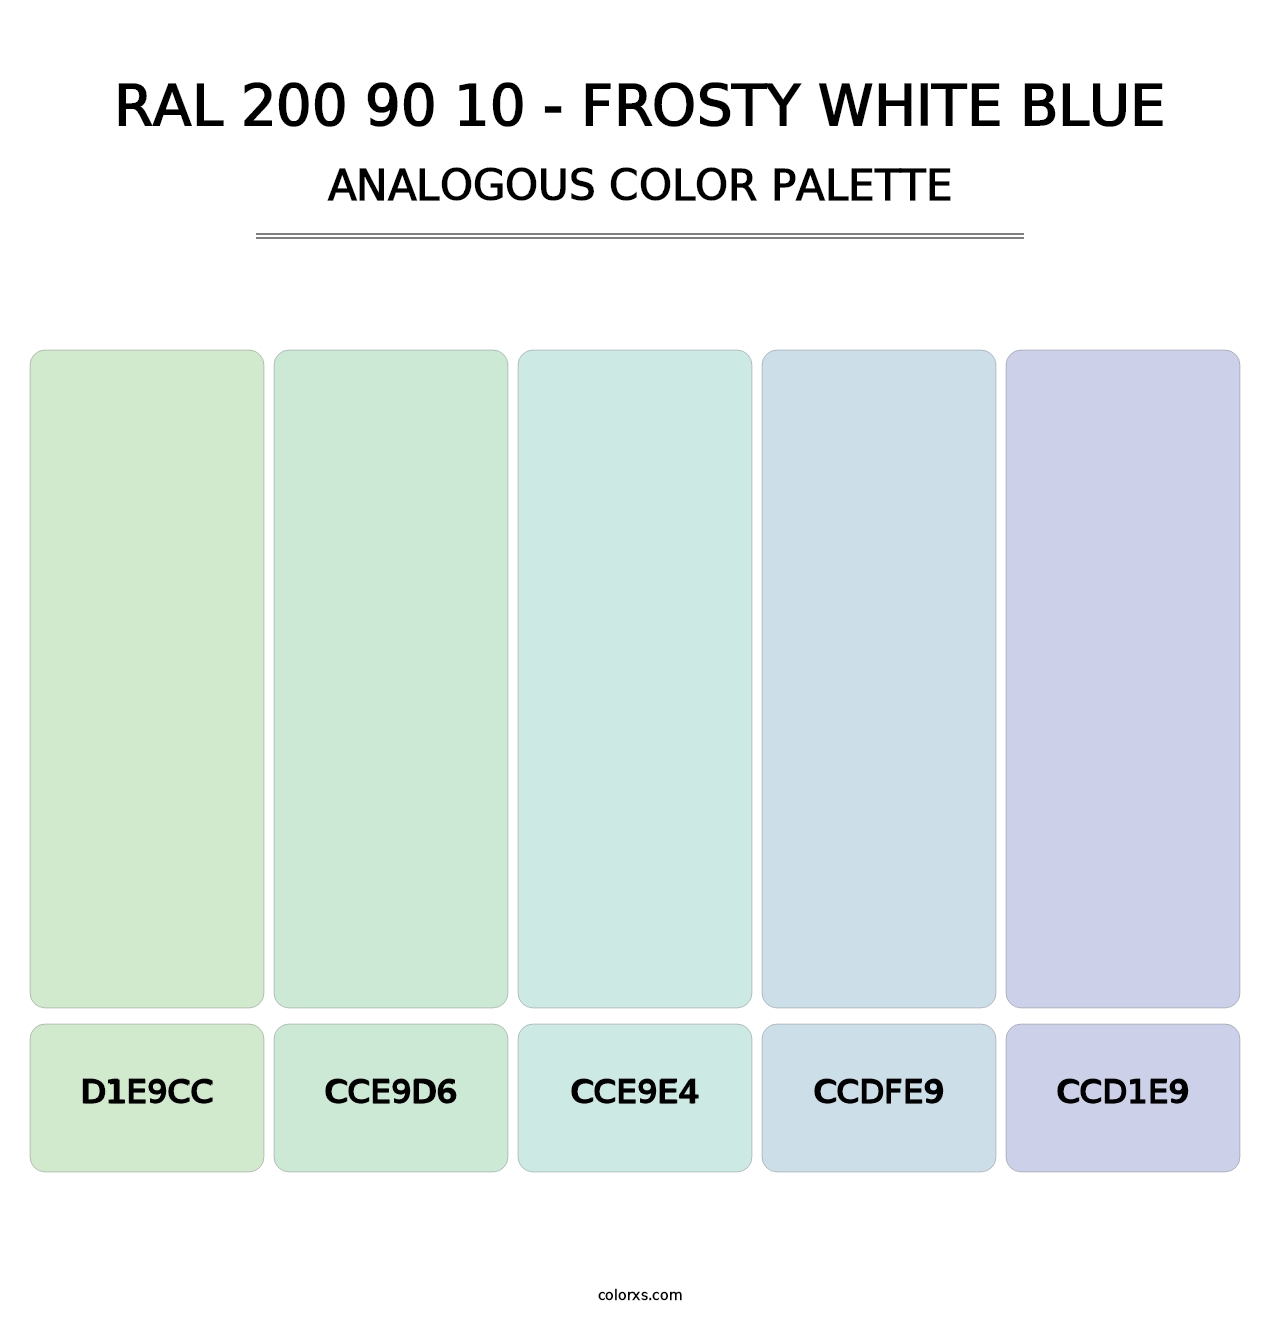 RAL 200 90 10 - Frosty White Blue - Analogous Color Palette